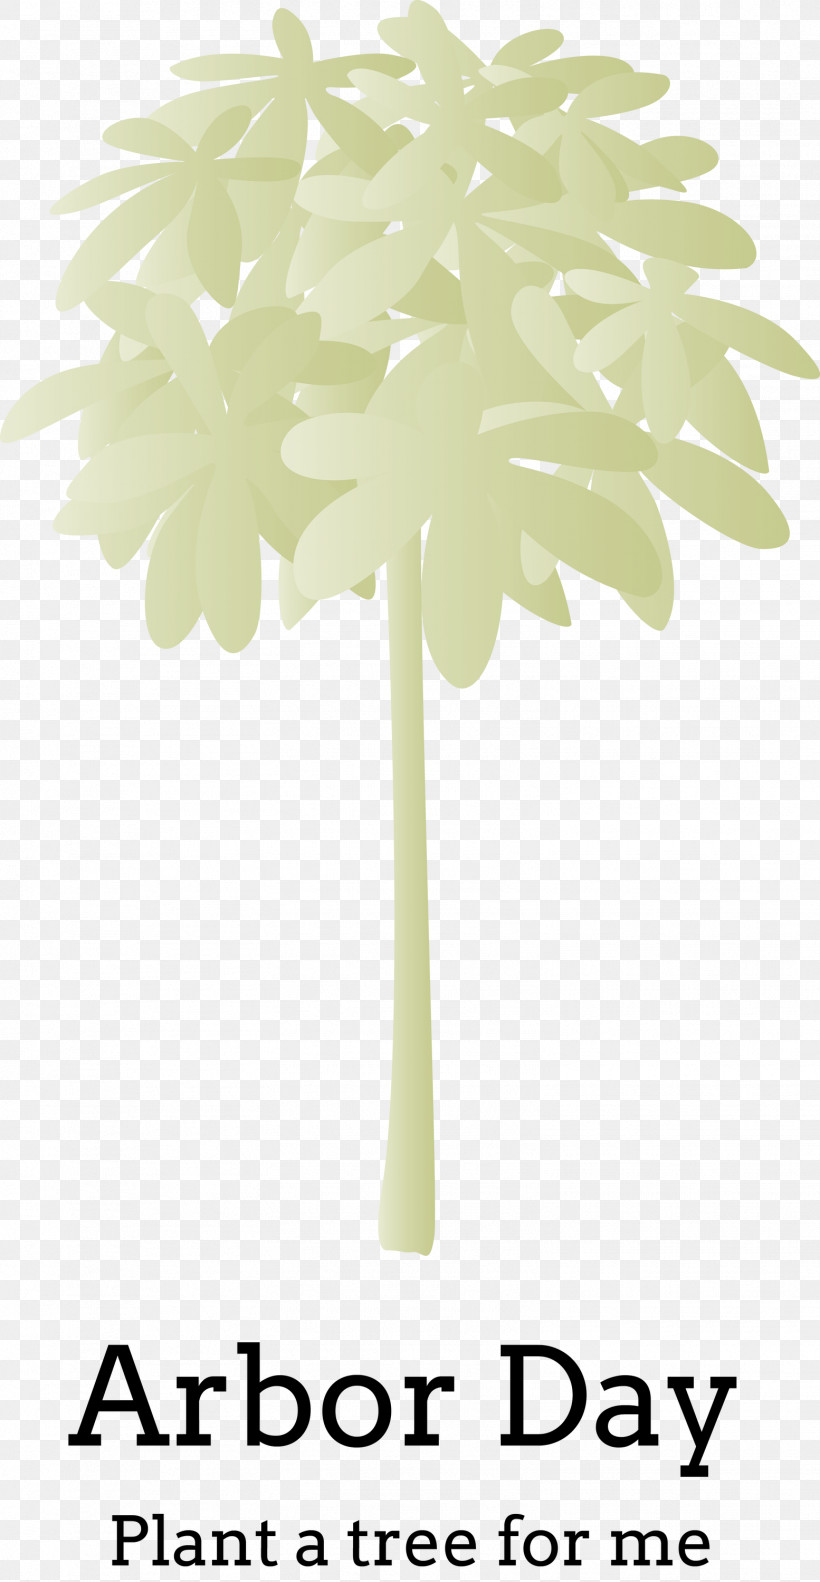 Arbor Day Green Earth Earth Day, PNG, 1554x2999px, Arbor Day, Arecales, Earth Day, Flower, Green Earth Download Free